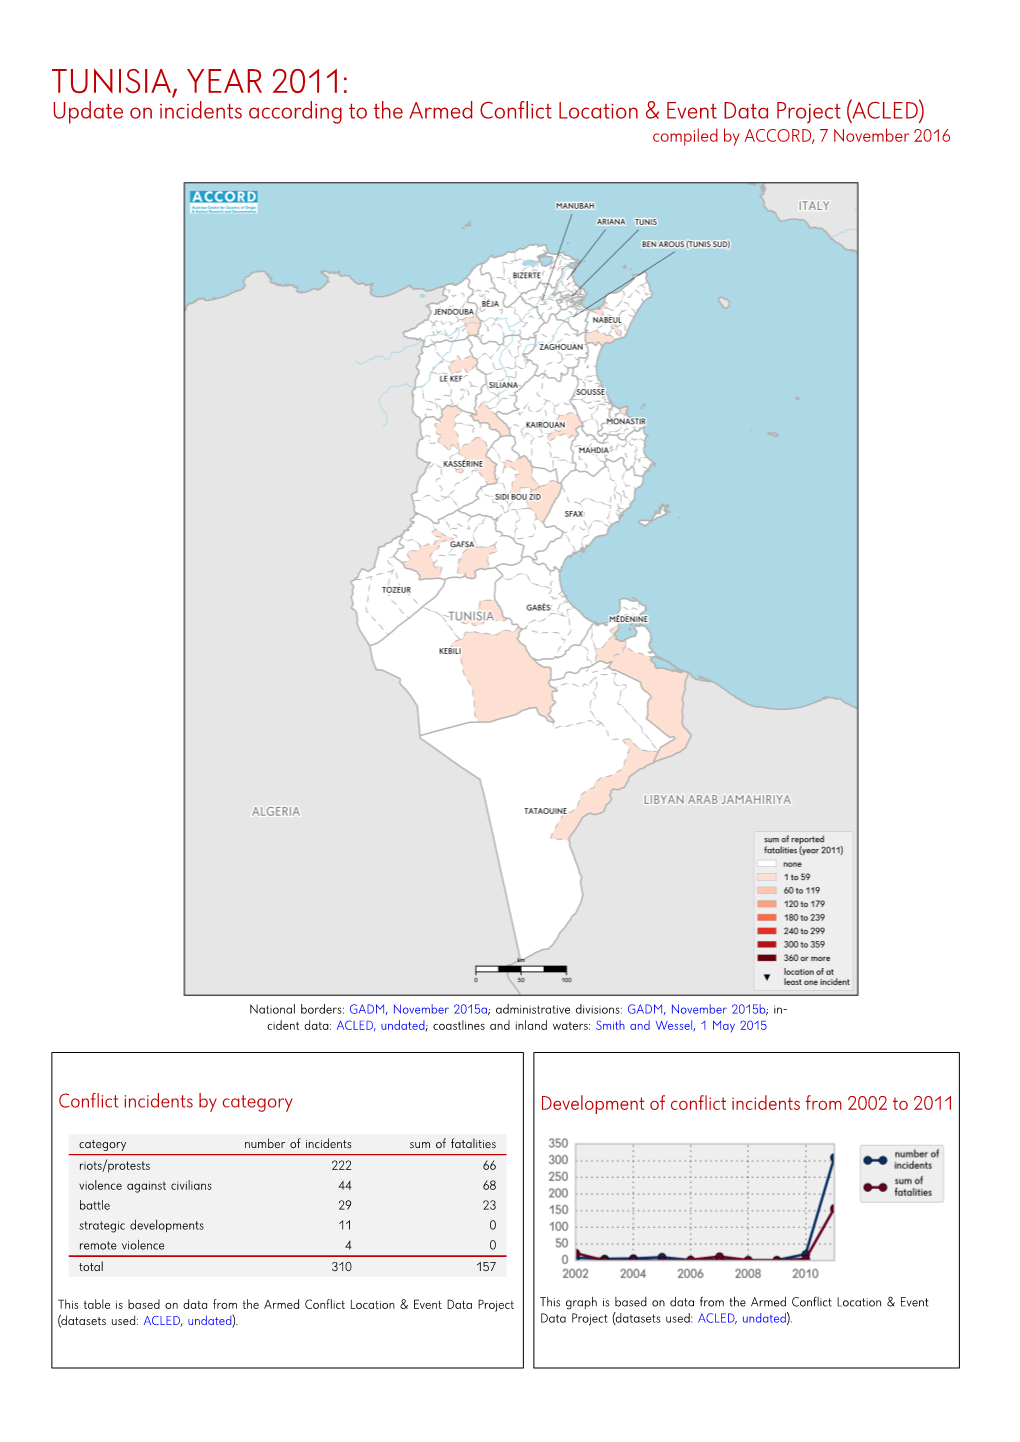 TUNISIA, YEAR 2011: Update on Incidents According to the Armed Conflict Location & Event Data Project (ACLED) Compiled by ACCORD, 7 November 2016